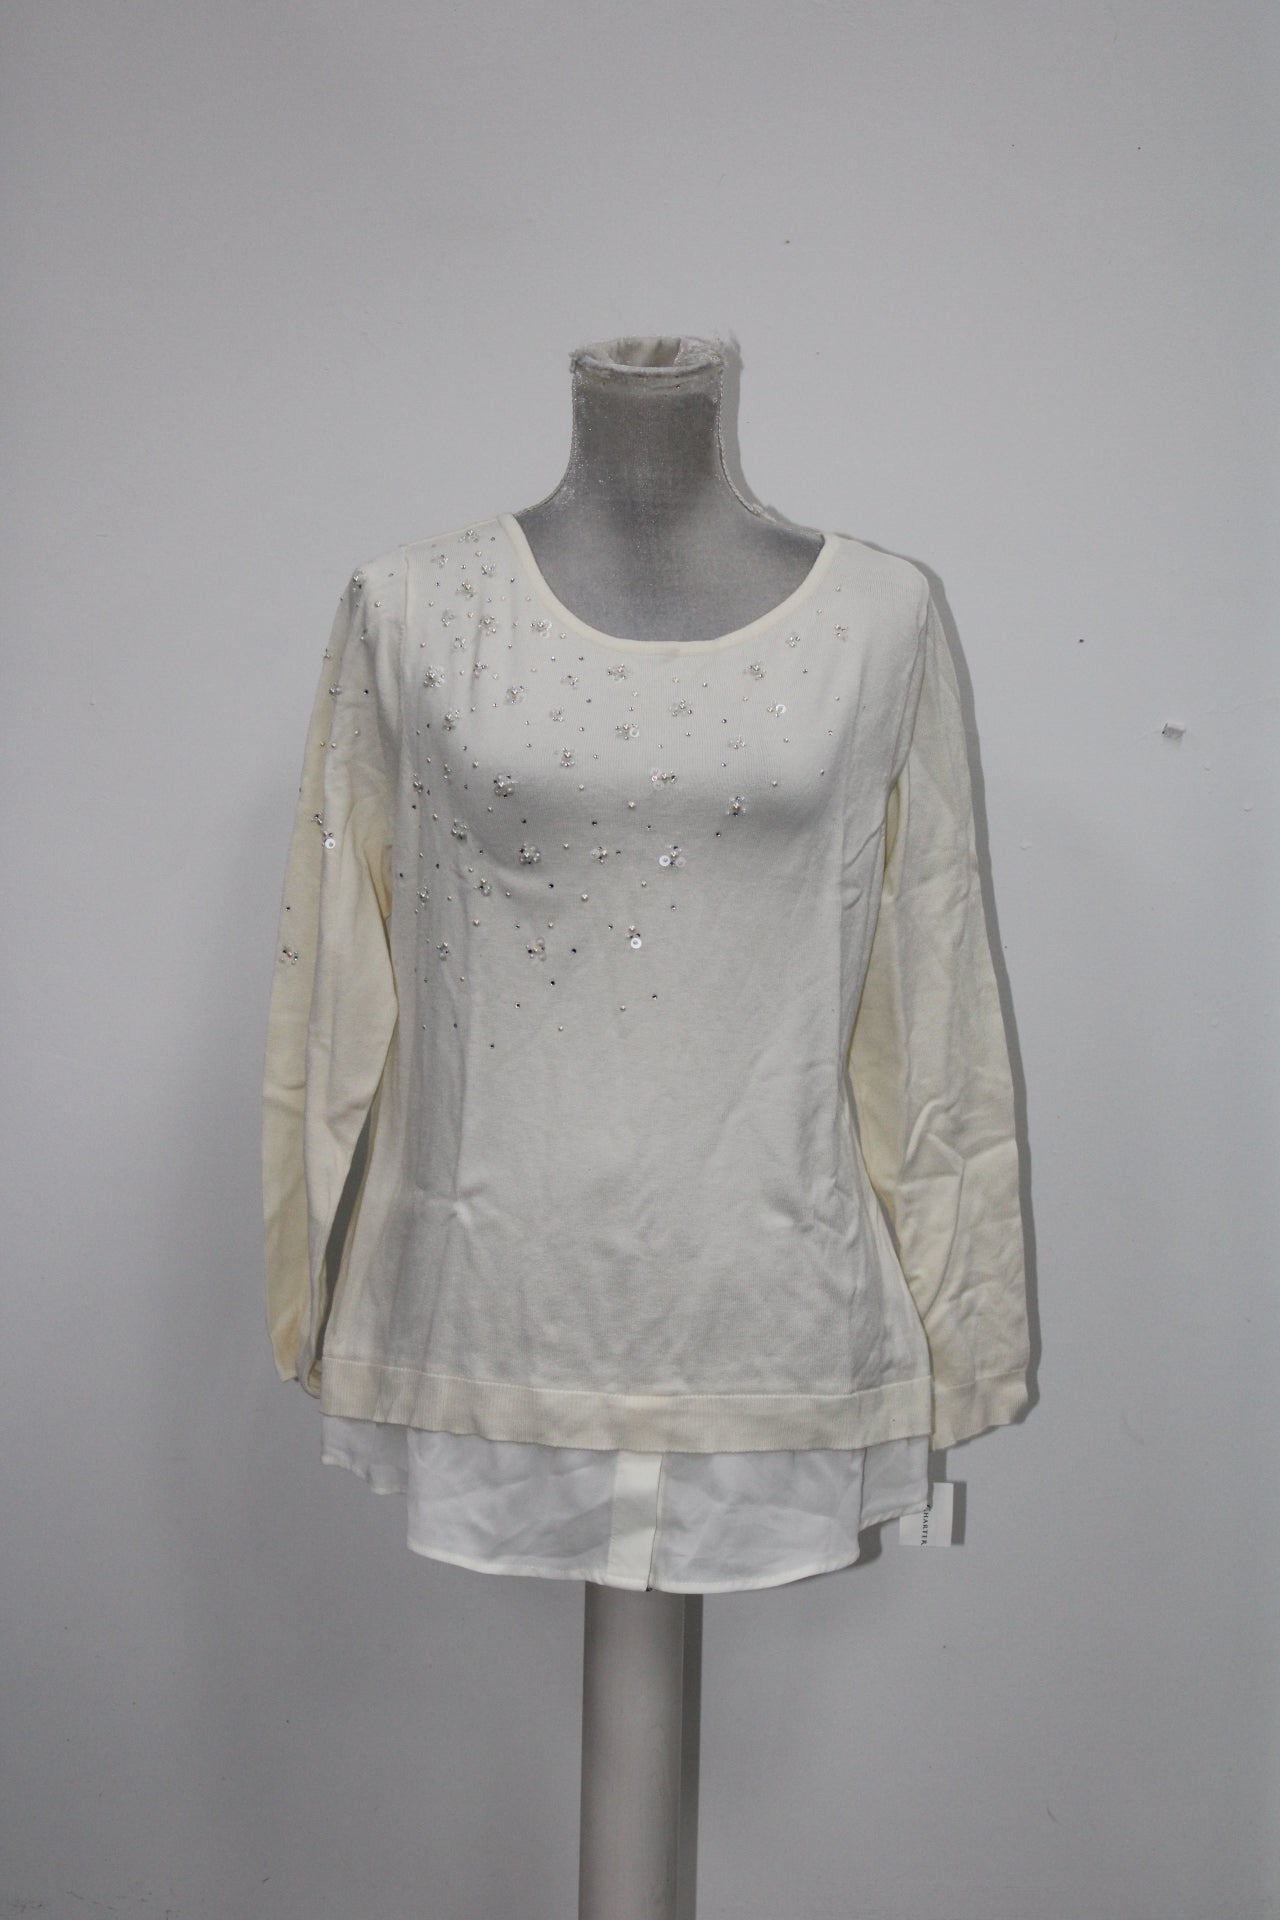 Charter Club Layered-Look Embellished Sweat Vintage Cream XL